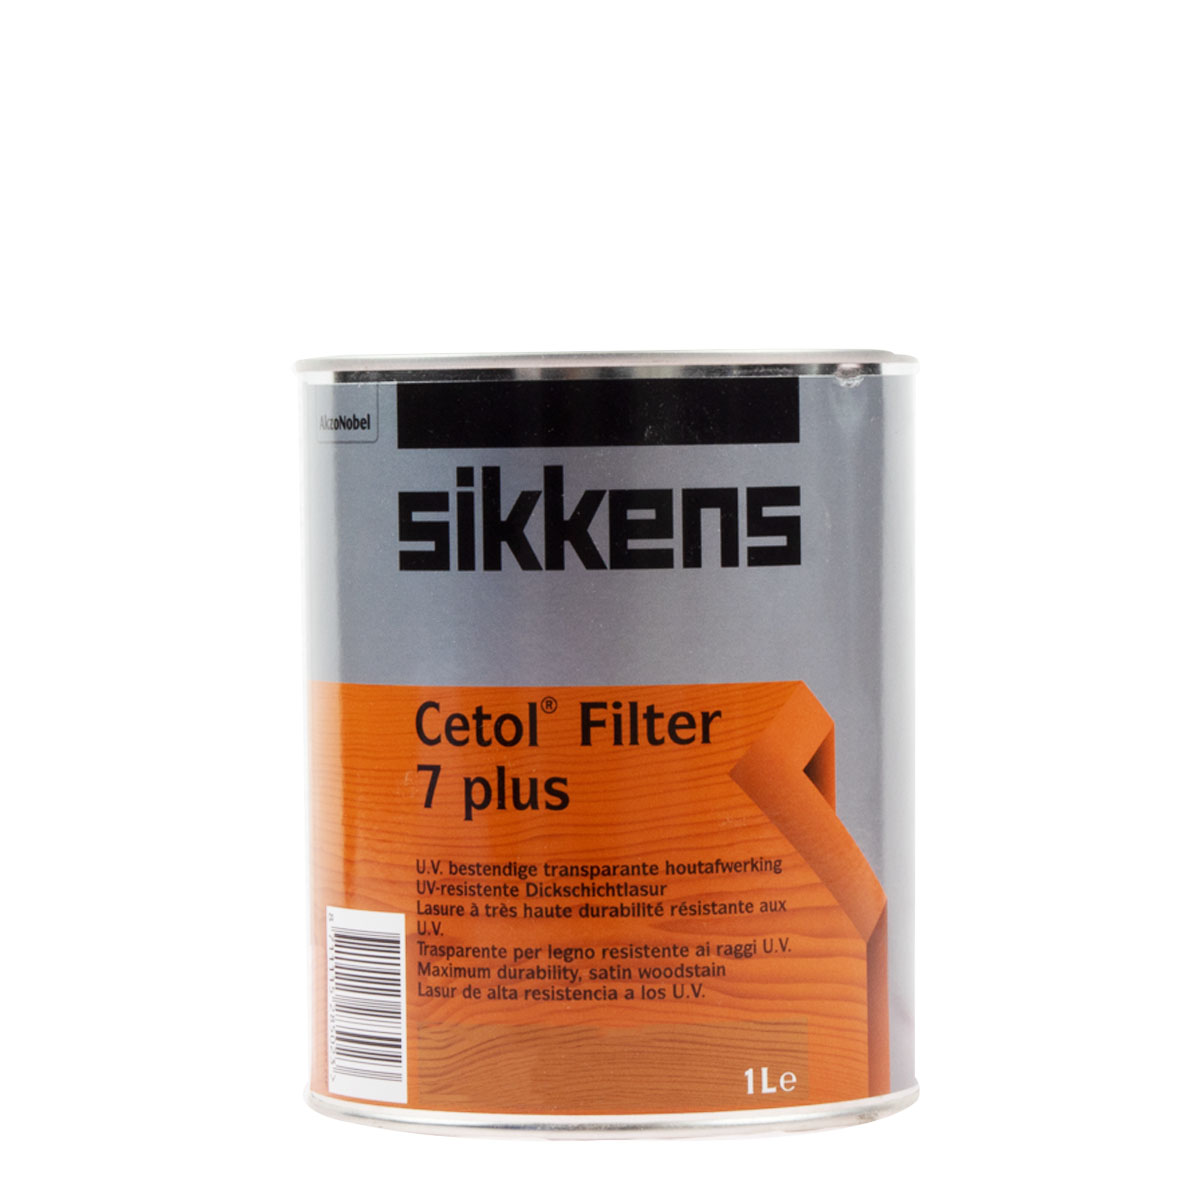 sikkens_cetolfilter_7plus_1l_gross